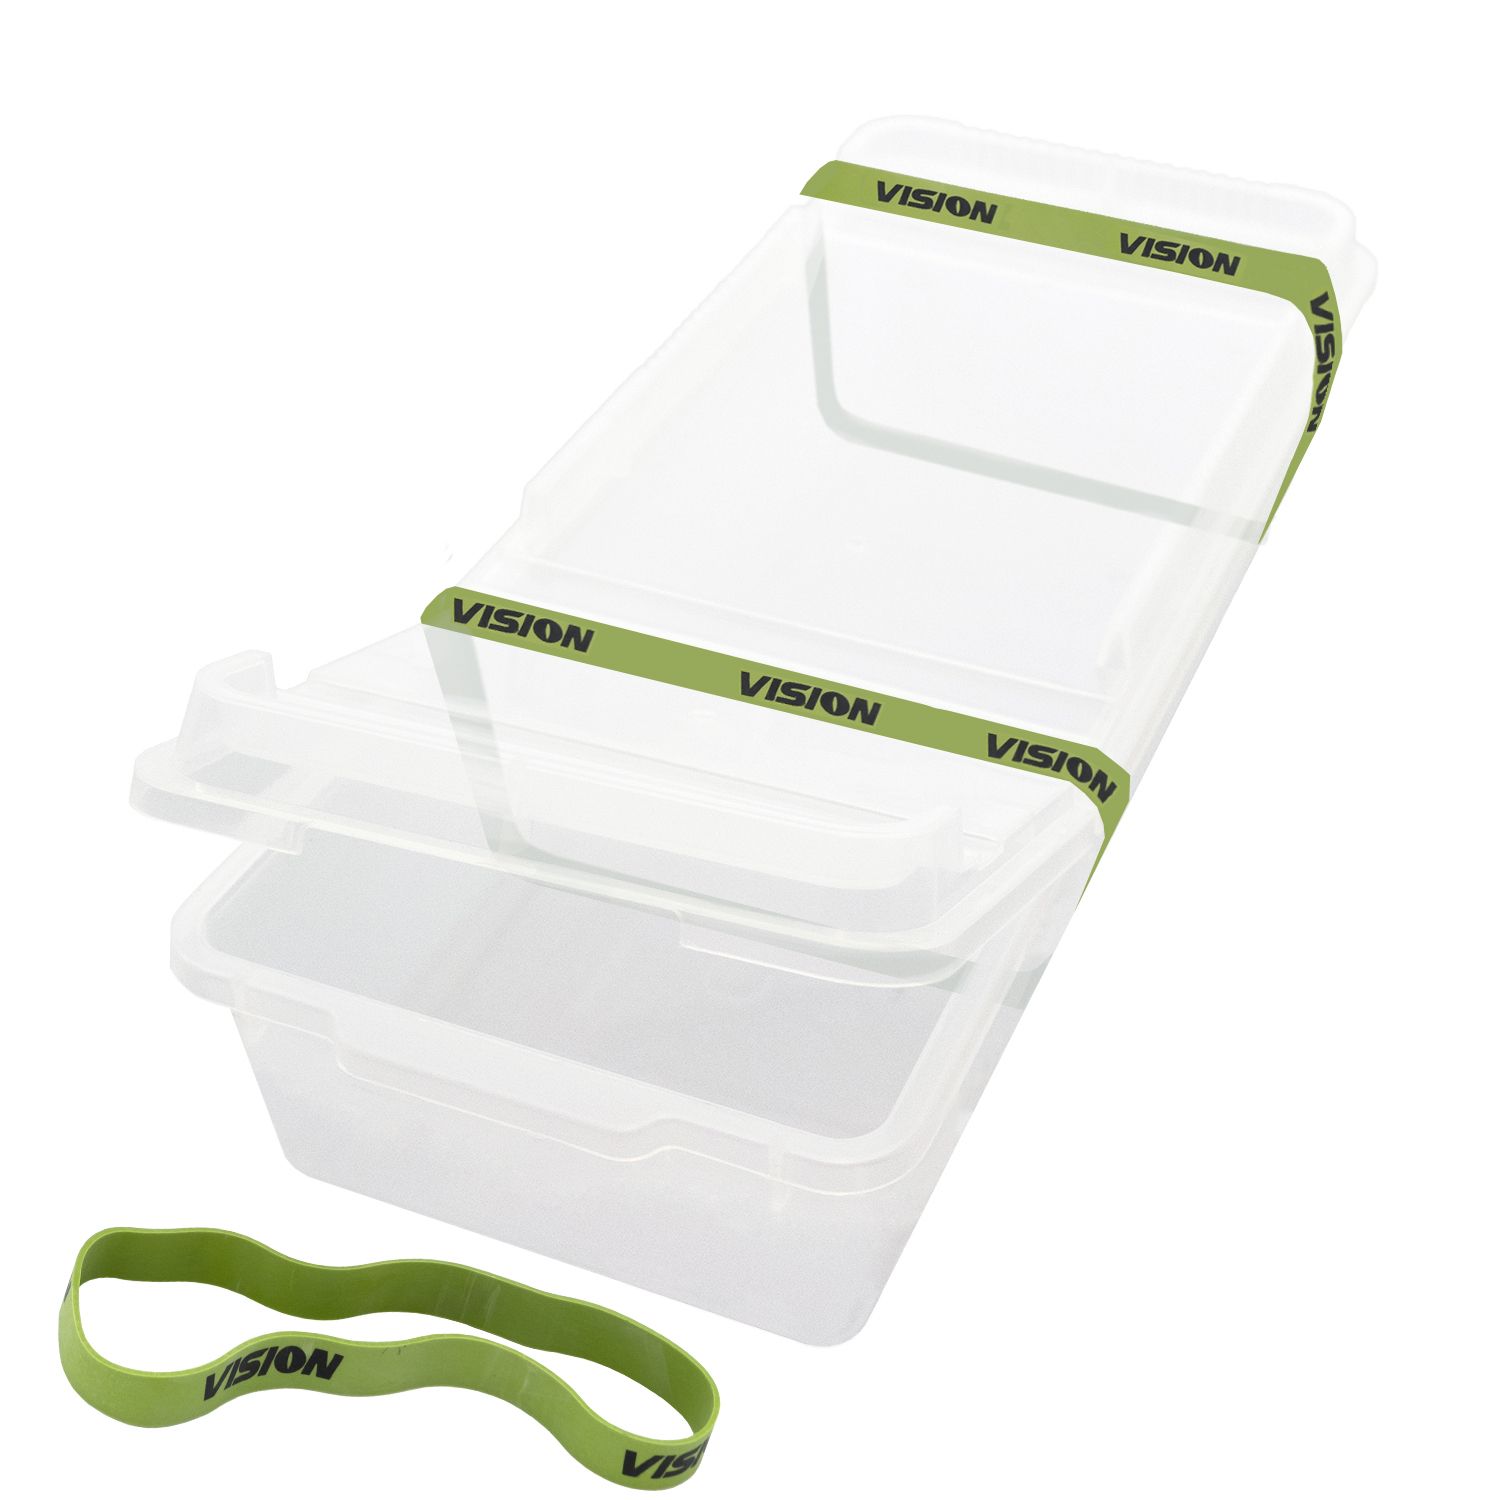 5.5-Quart Clear Storage Box with Lid, 12-Pack